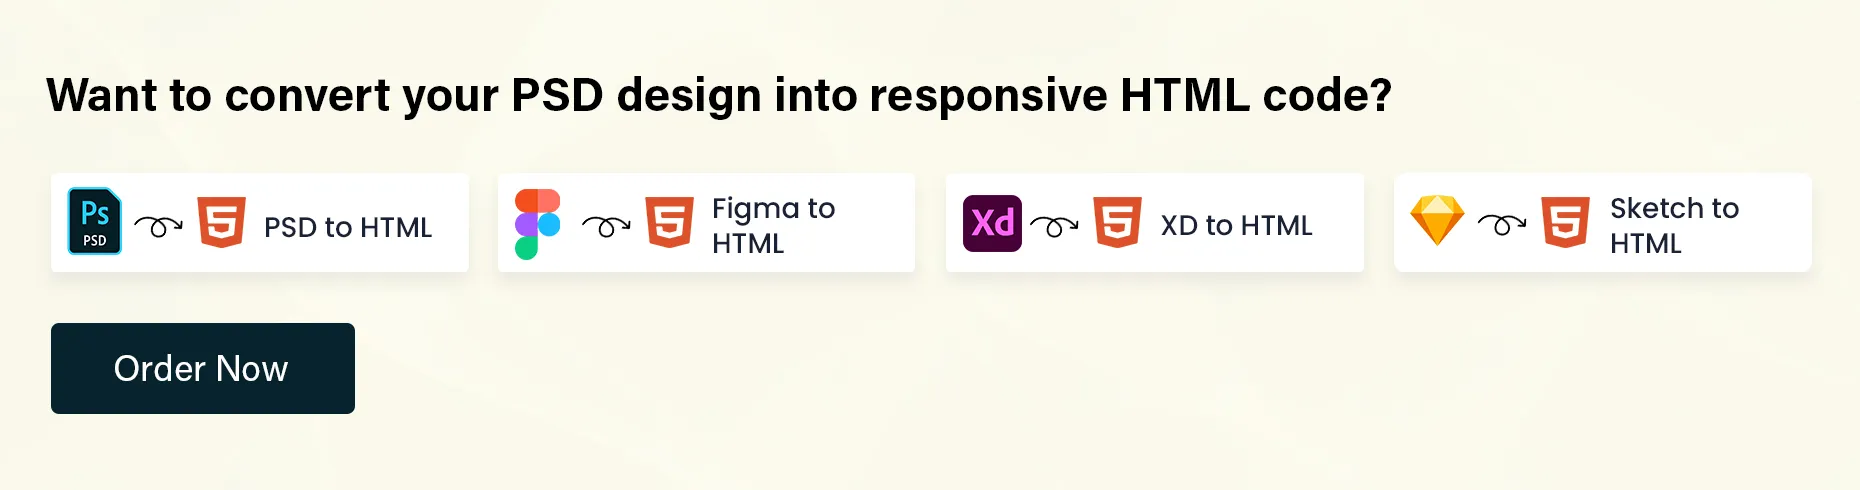 Order Now Convert PSD designs to HTML